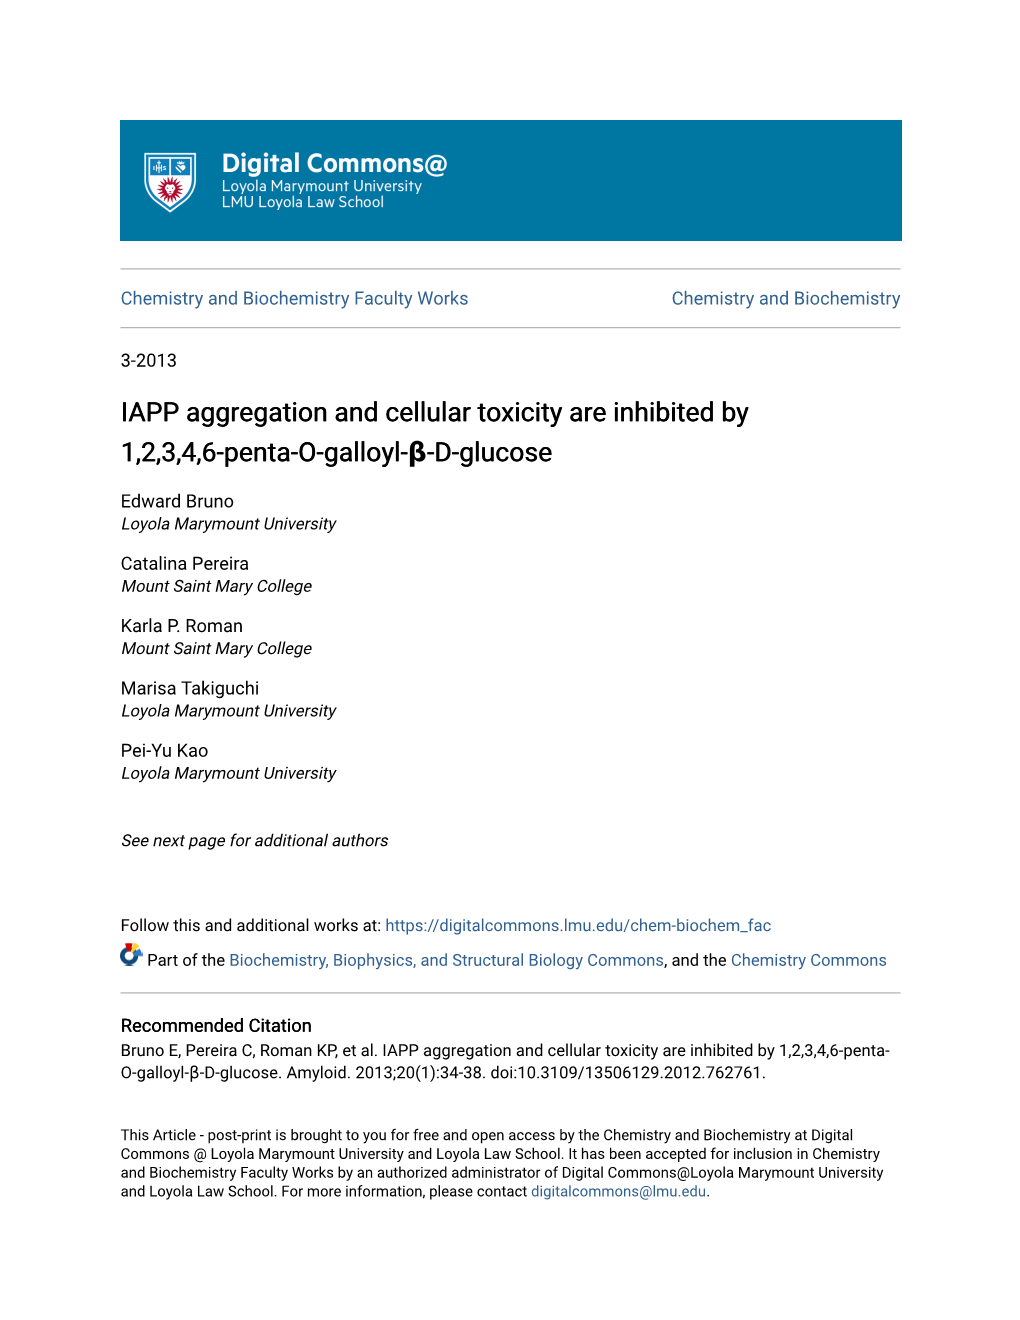 IAPP Aggregation and Cellular Toxicity Are Inhibited by 1,2,3,4,6-Penta-O-Galloyl-Β-D-Glucose